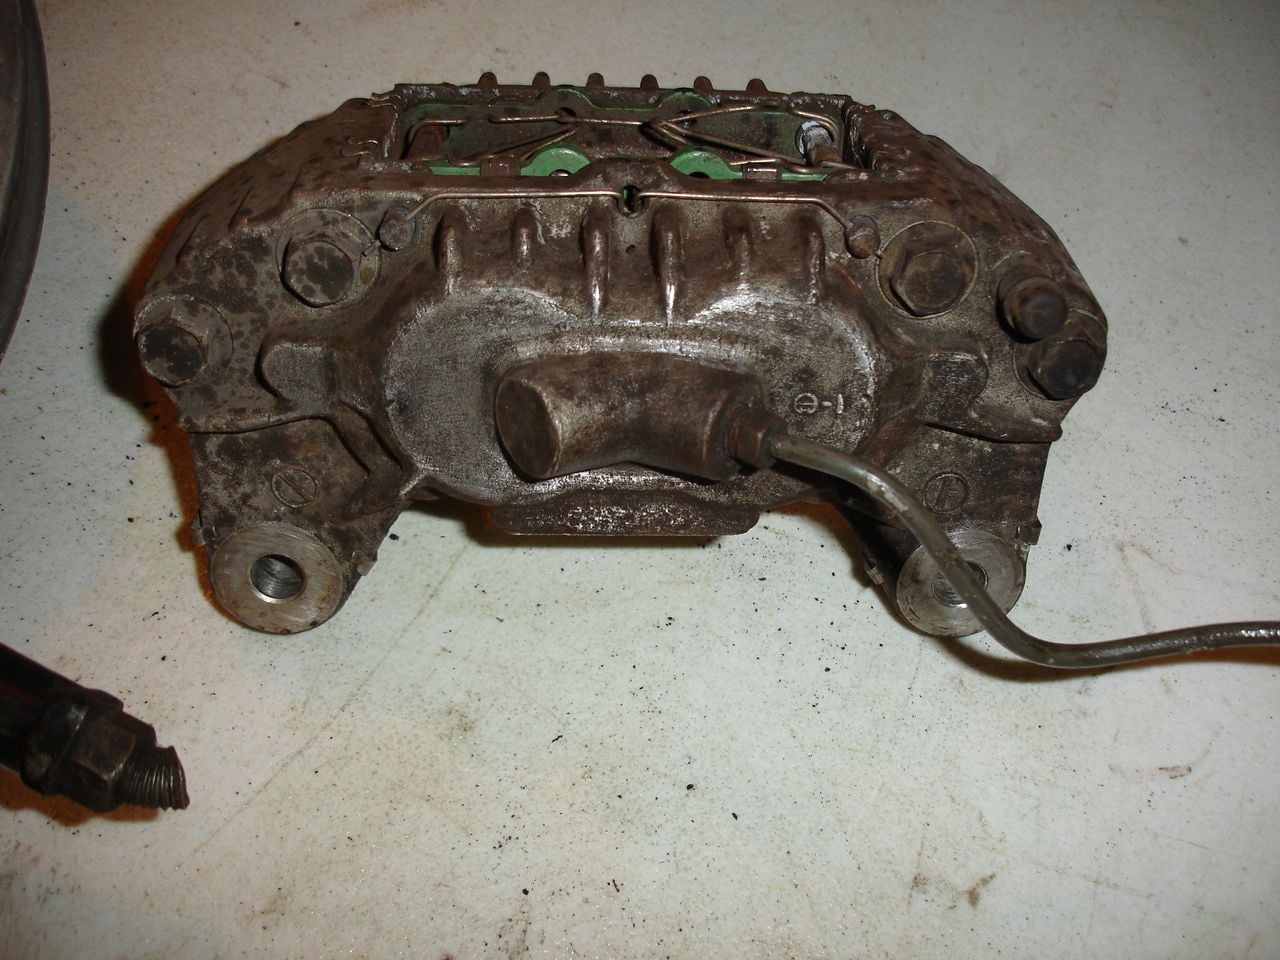 Wheels and Tires/Axles - RX7 Turbo2 front spindle and brakes - Used - Raleigh, NC 27562, United States